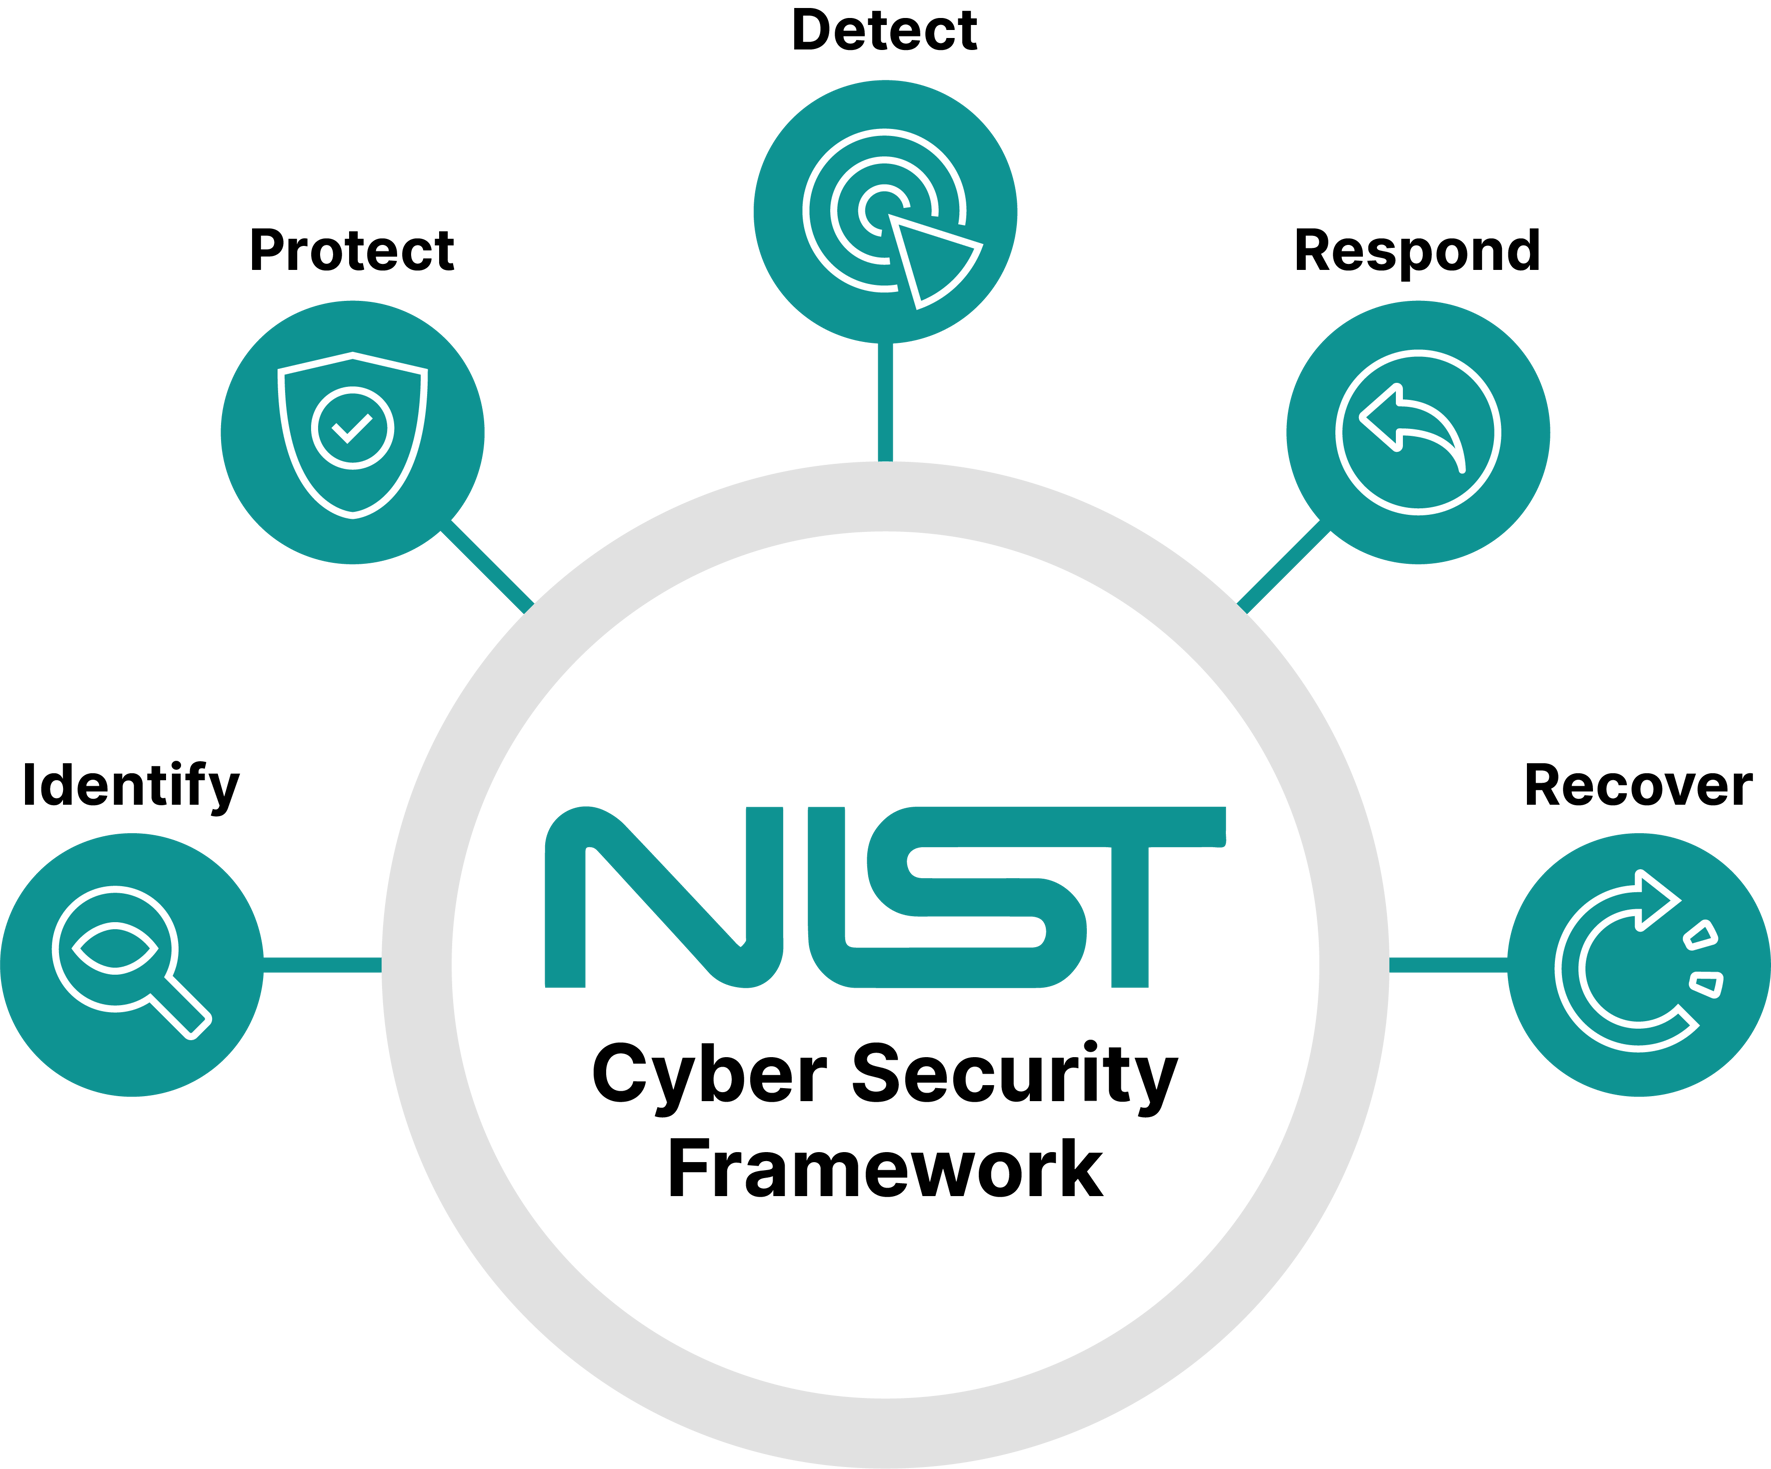 An infographic describing the five steps of the NIST Cyber Secudiry Framework